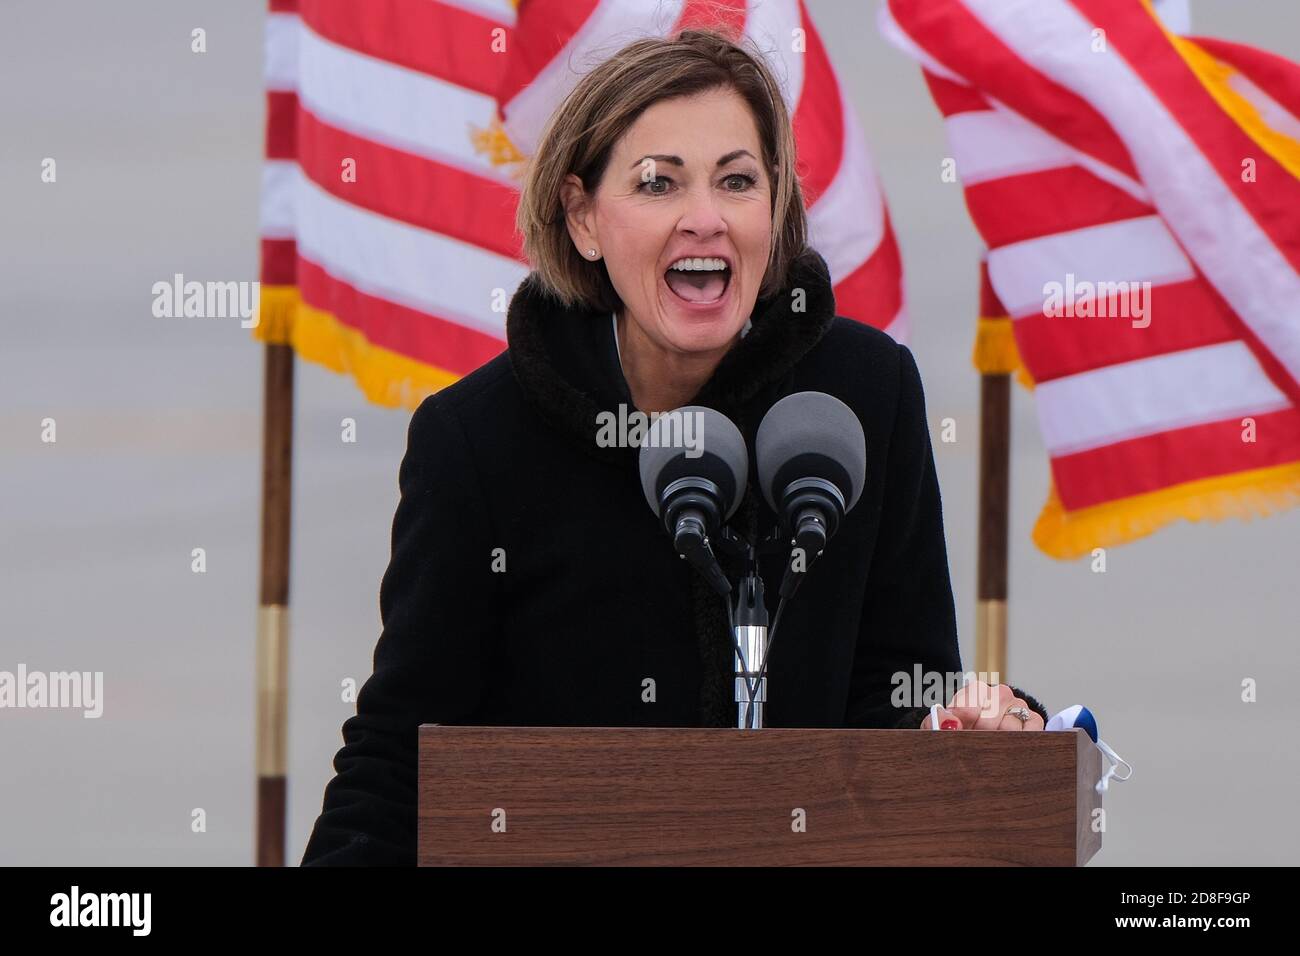 Des Moines, Iowa, USA. 29th Oct, 2020. Iowa Gov. KIM REYNOLDS speaks to  supporters during a "Make America Great Again Victory Rally"" at the Des  Moines International Airport on October 29, 2020.